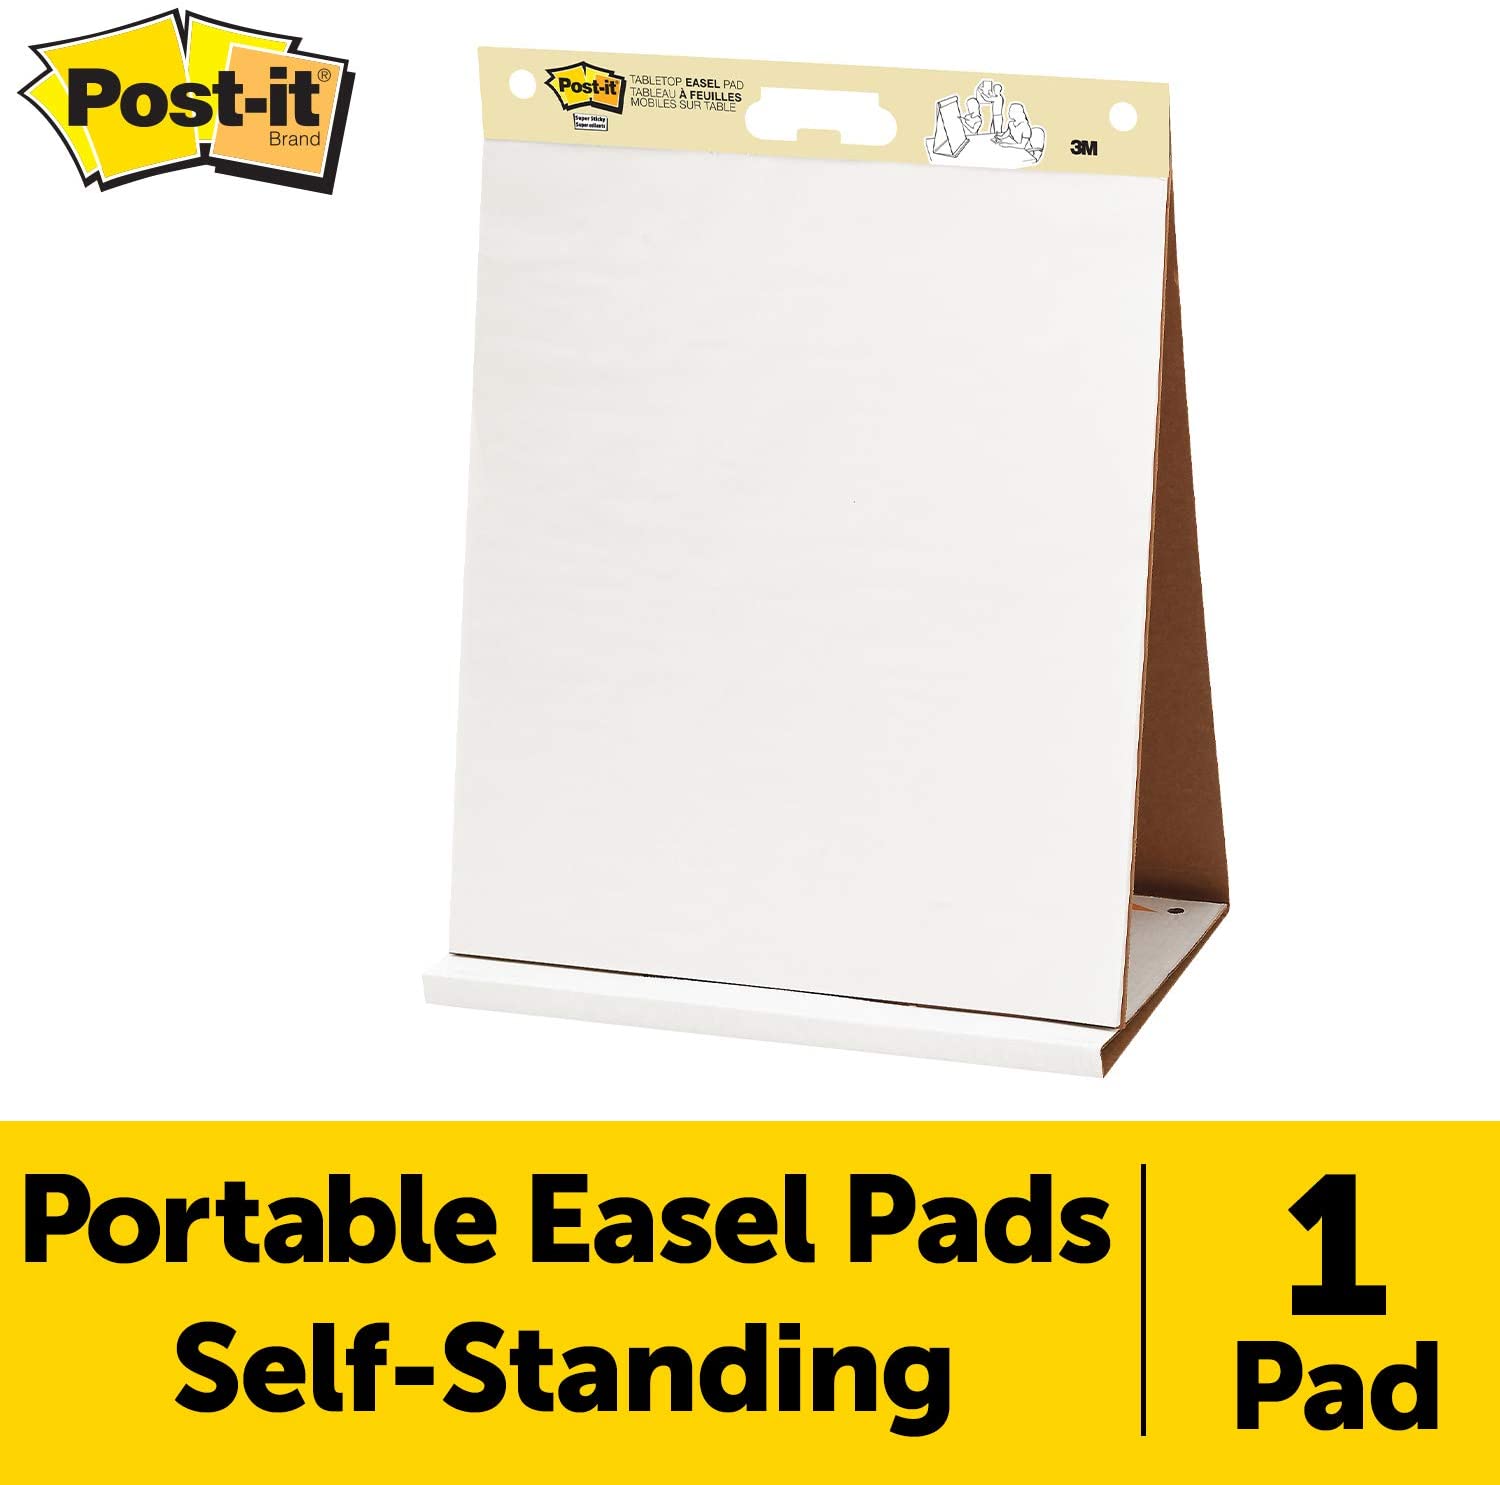 Post-it® Super Sticky Tabletop Easel Pad with Dry Erase Surface 563 DE. 20  x 23 in (50.4 x 58.4cm), White Paper and Surface, 20 Sheets/Pad. 6  Pads/Pack – Ay stationery